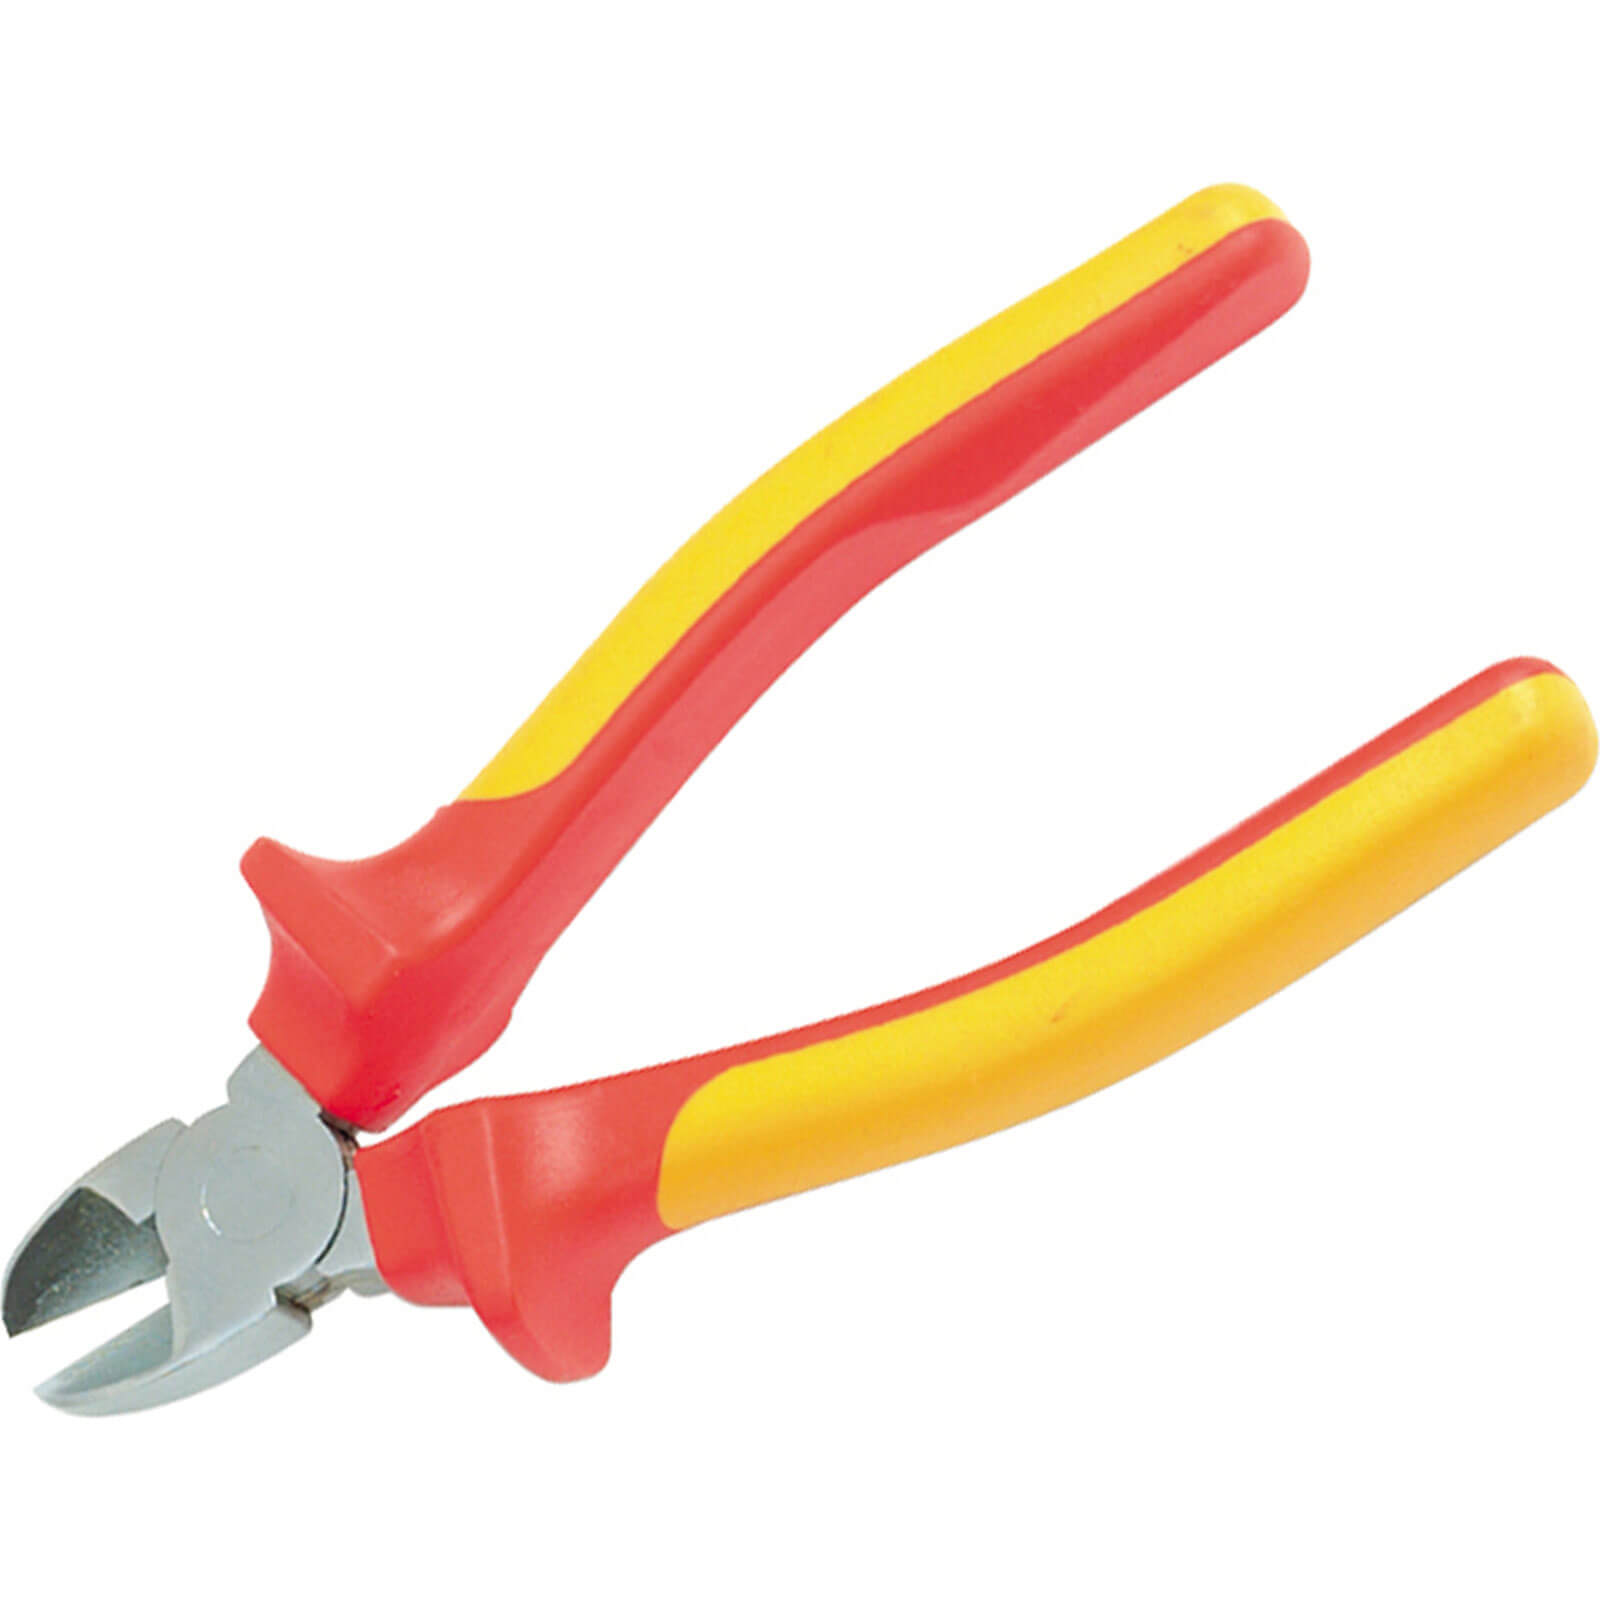 Photo of Stanley Insulated Side Cutters 160mm